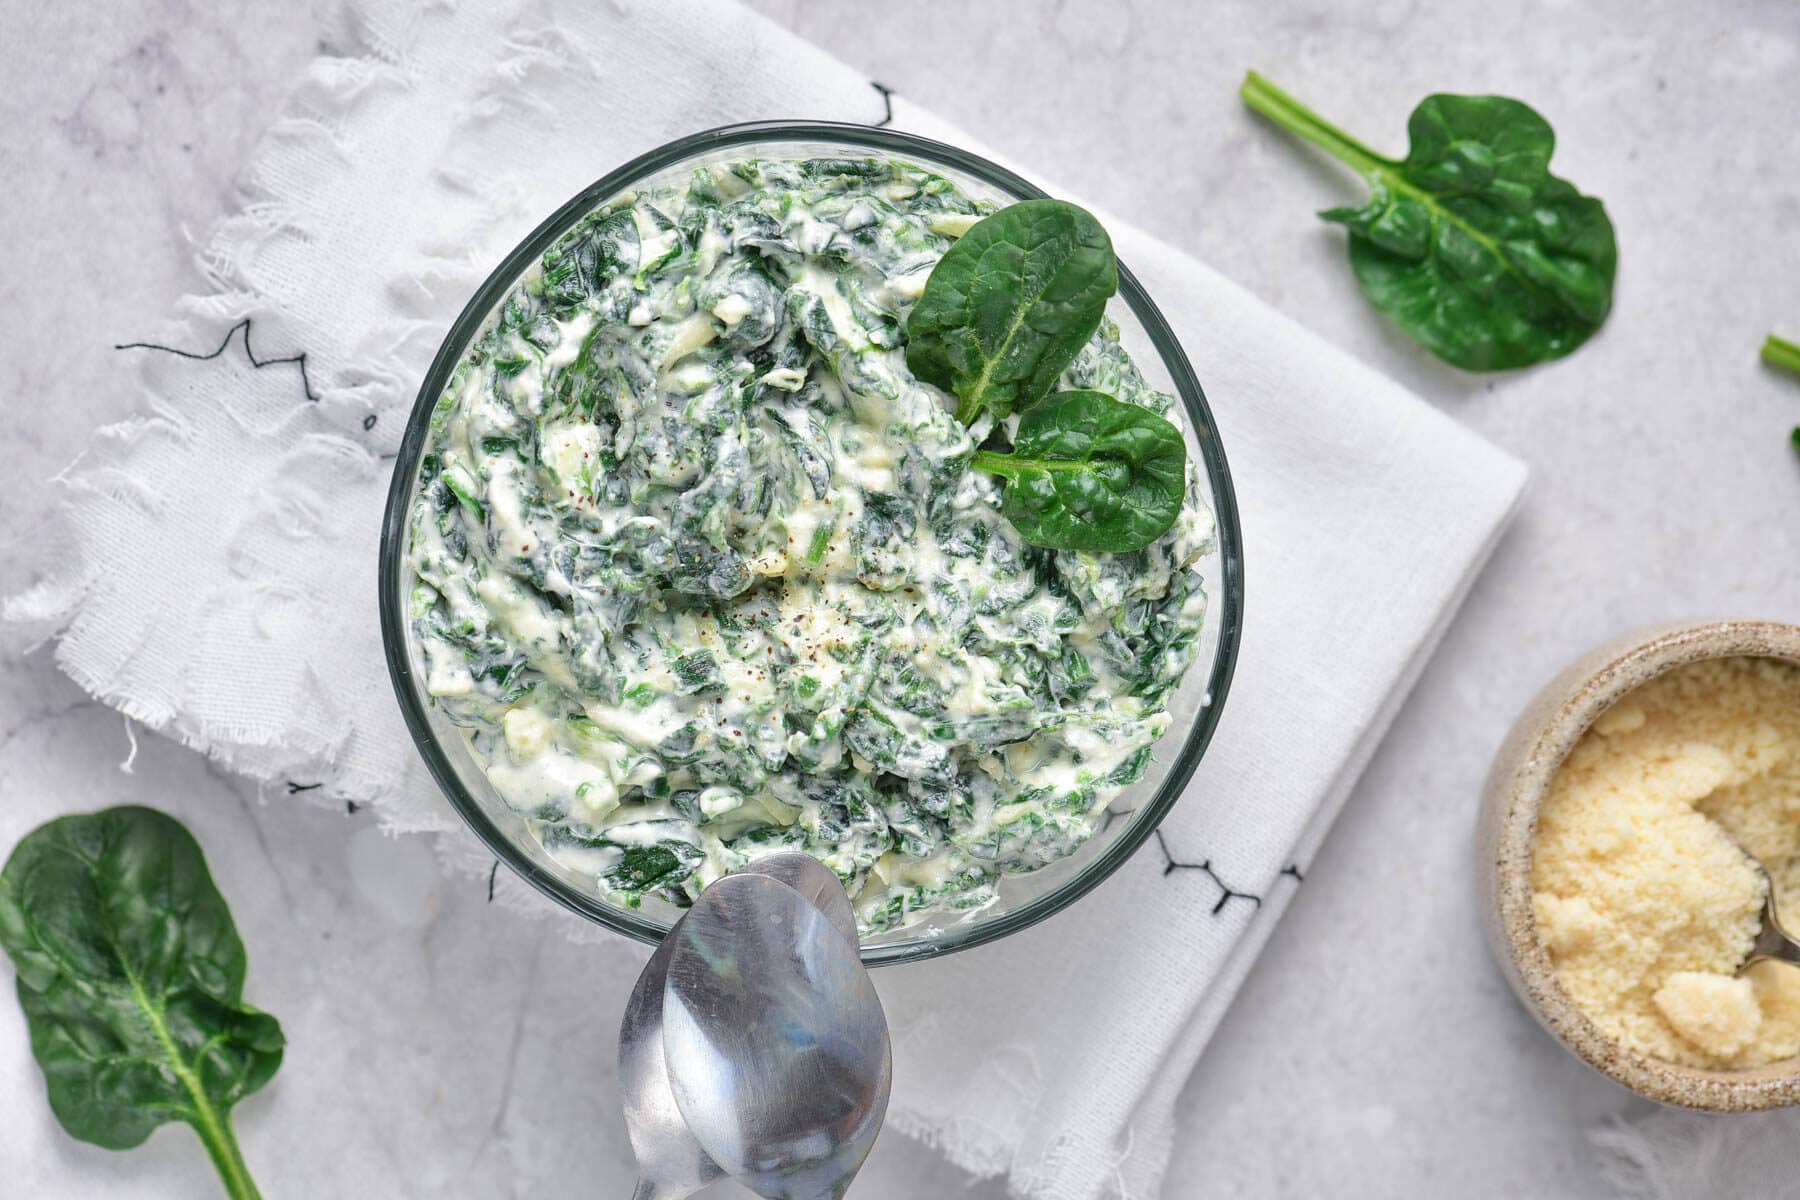 Cold spinach dip with spoons on white towel